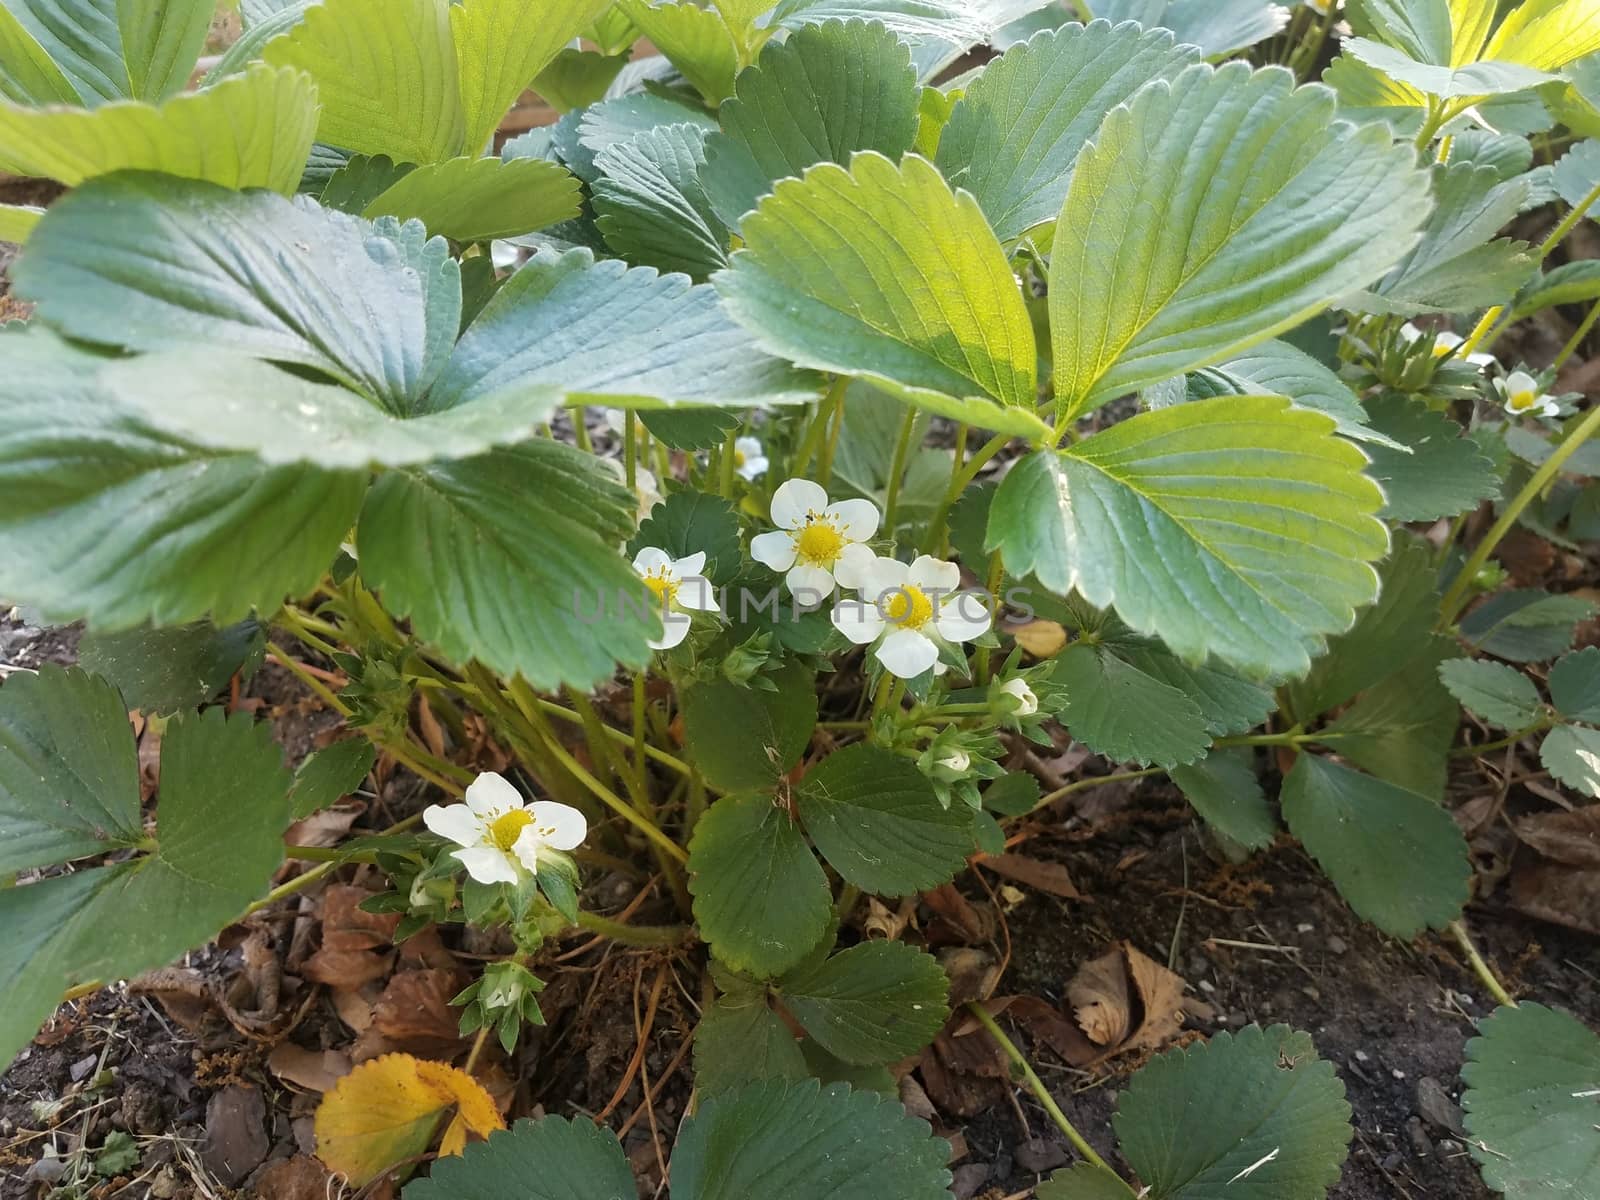 strawberry plant with white flowers and green leaves by stockphotofan1